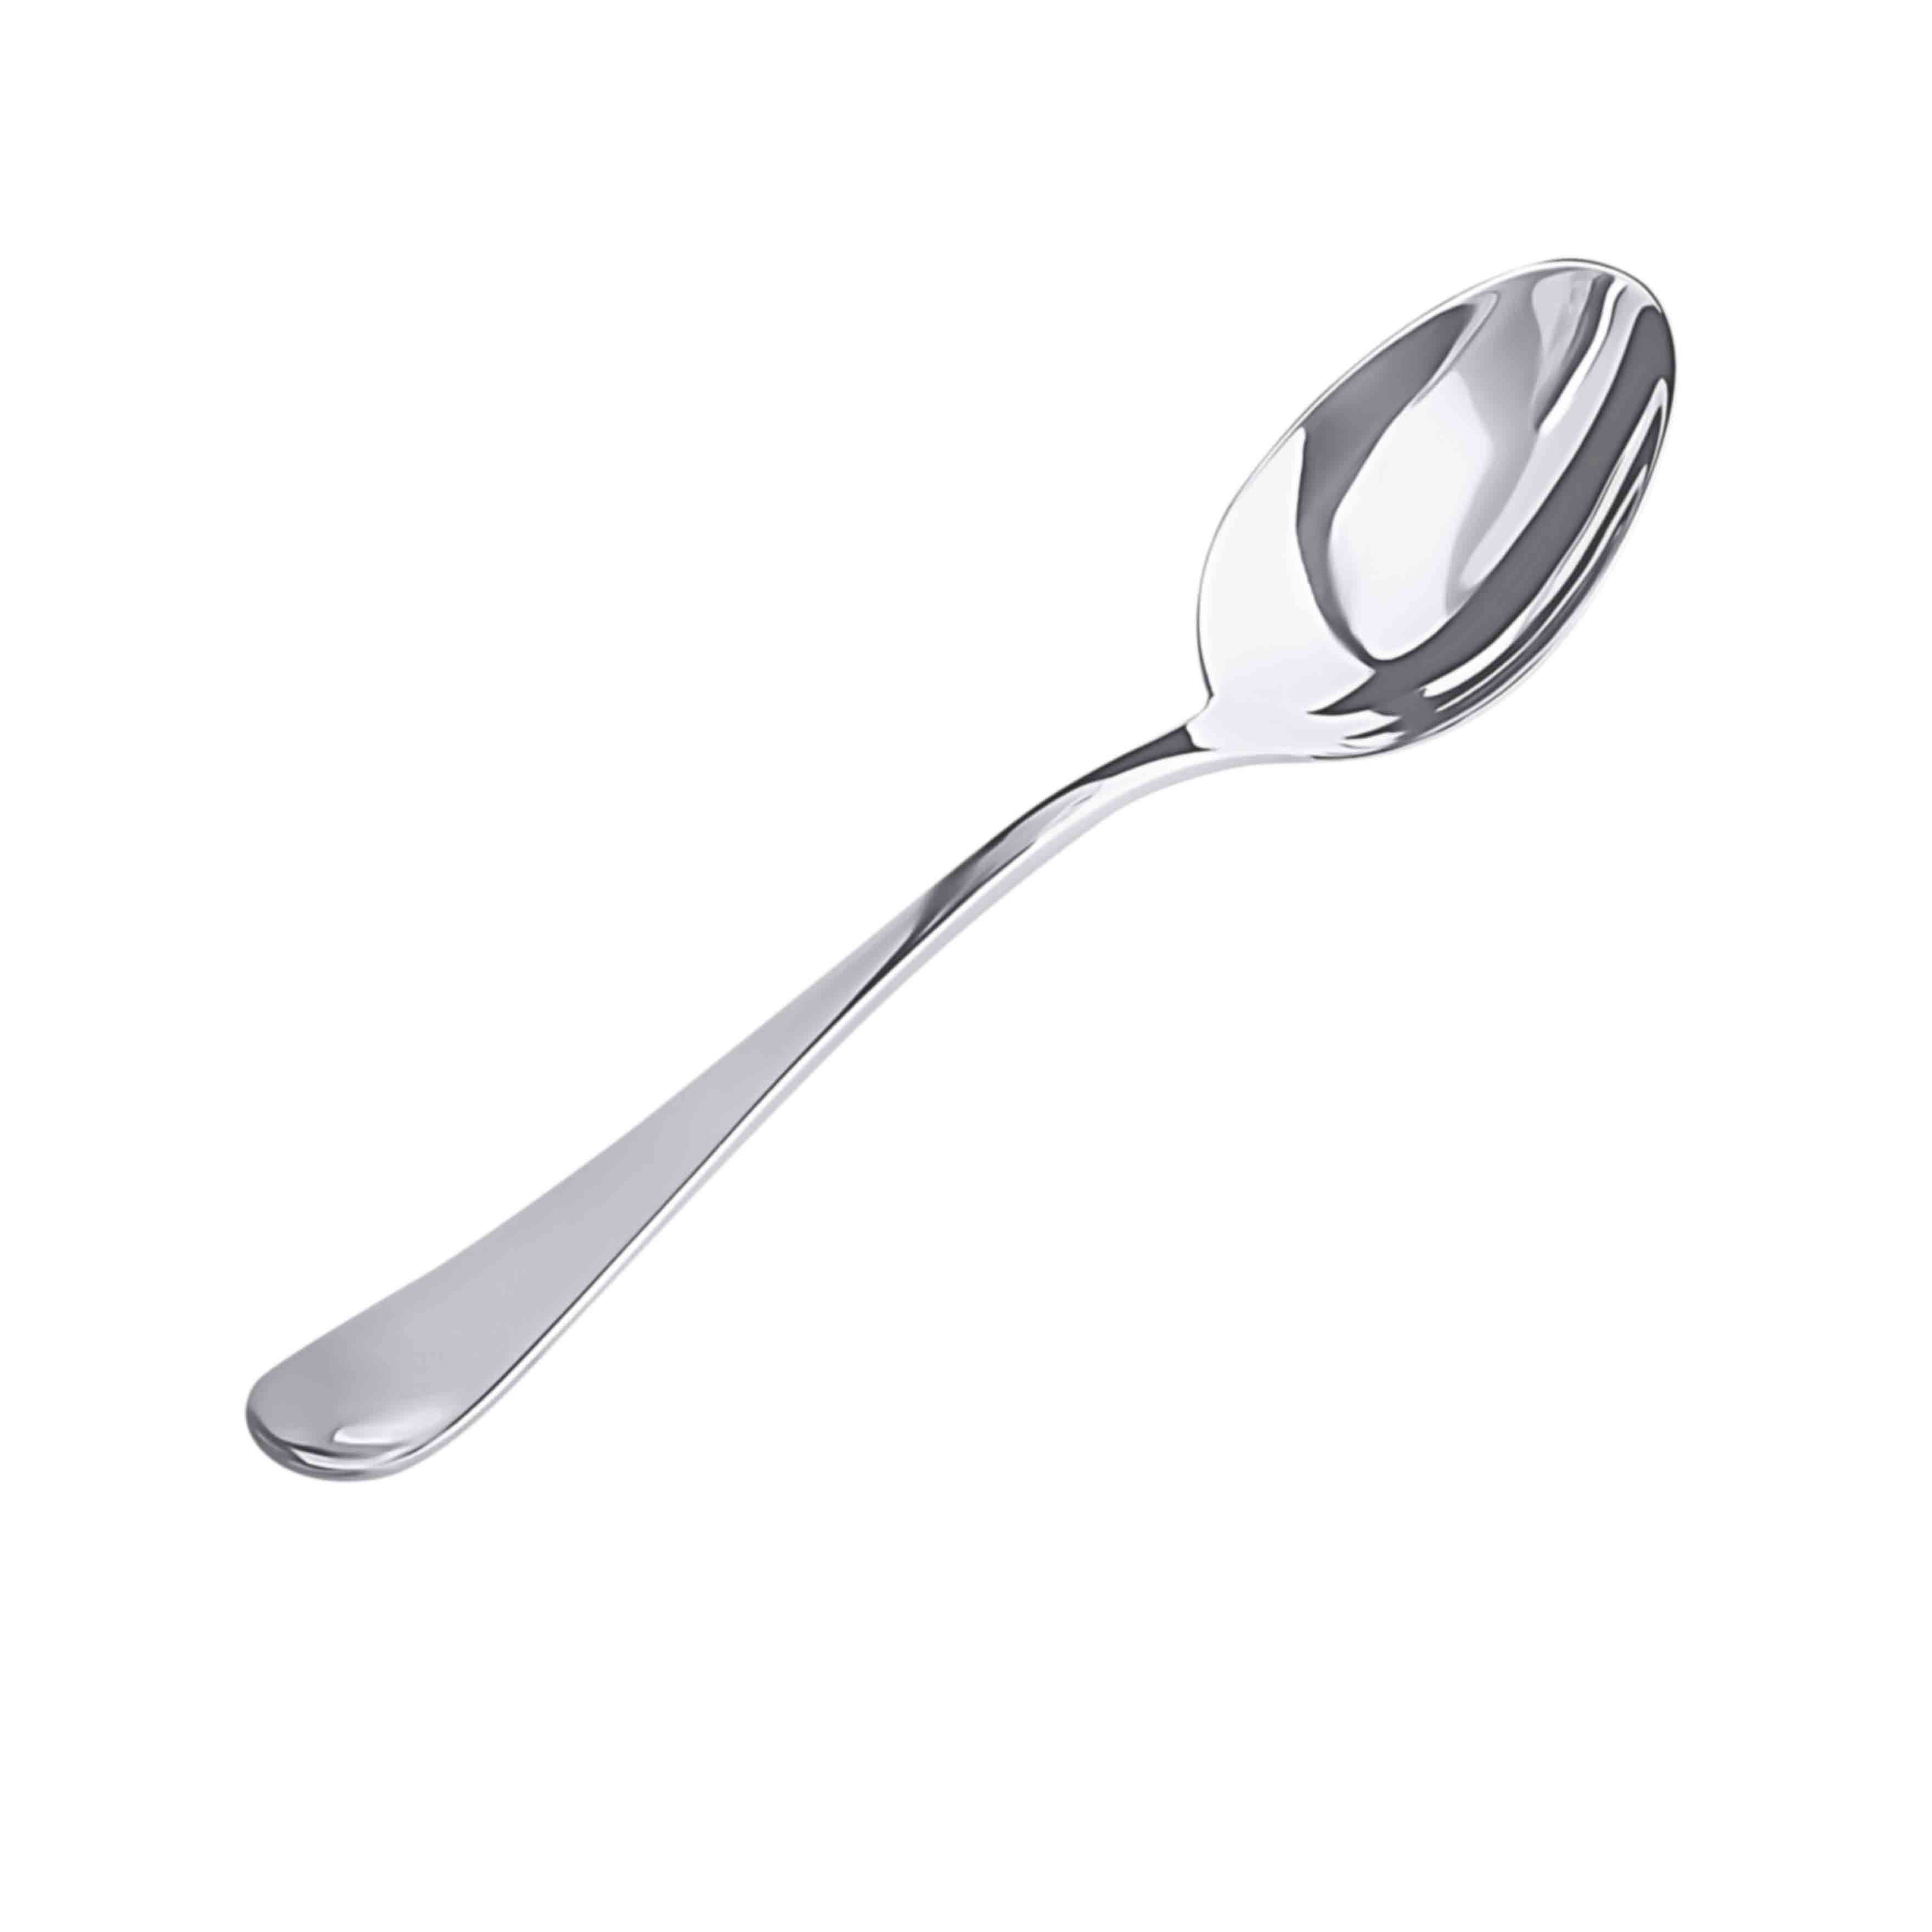 https://www.goldenflamingo.us/media/uploads/product/english-silver-table-spoon_3520_11070600.jpg